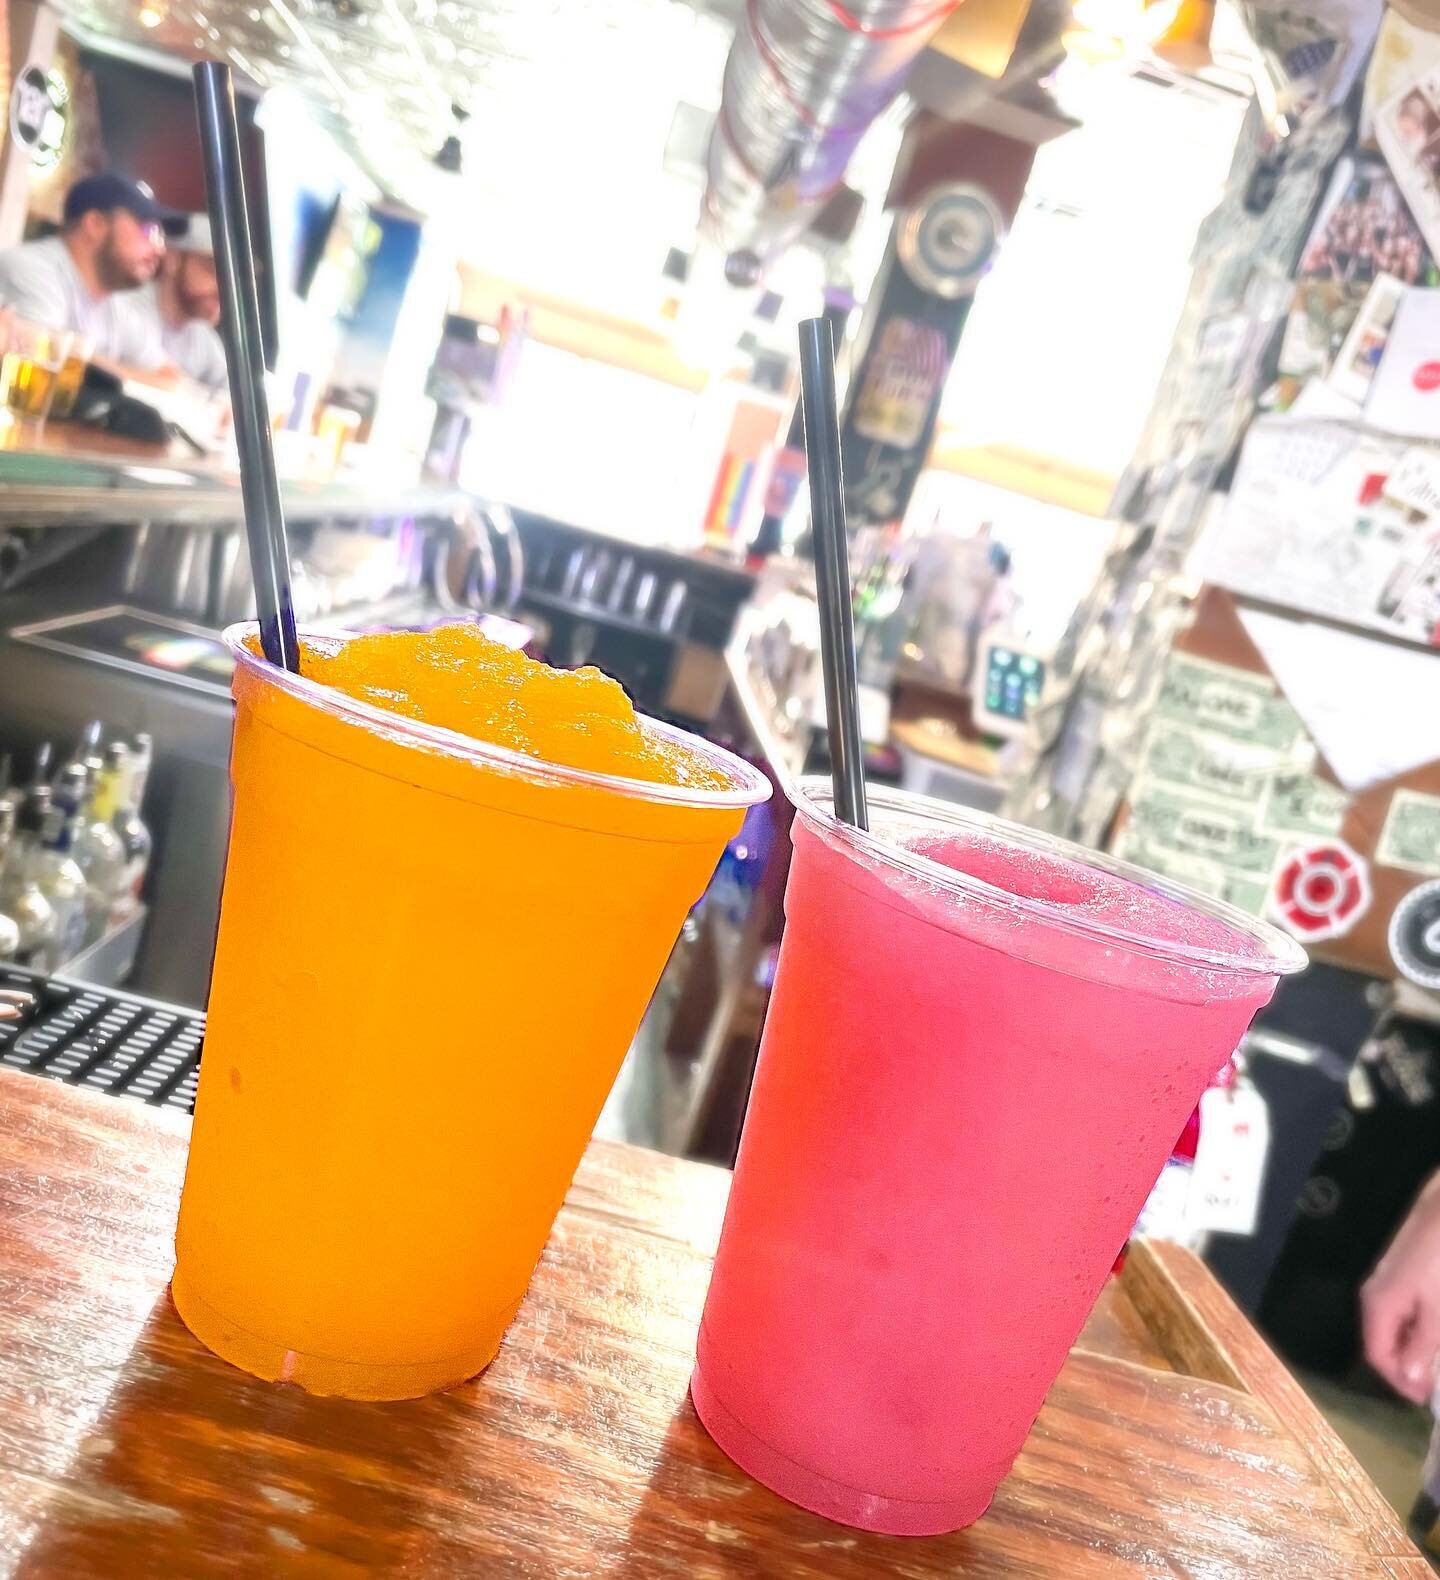 🔥 WHEEWWIEEE!!🔥 It&rsquo;s hot out there, which means boozy slushees are BACK !!! Stop in and select your favorite flavor from:

- Cotton Candy 🍥
- Blue Raspberry 🫐
- Grape 🍇
- Orange 🍊
- Egg Custard 🧡
- Lemon 🍋
 
Come in and cool off in the 